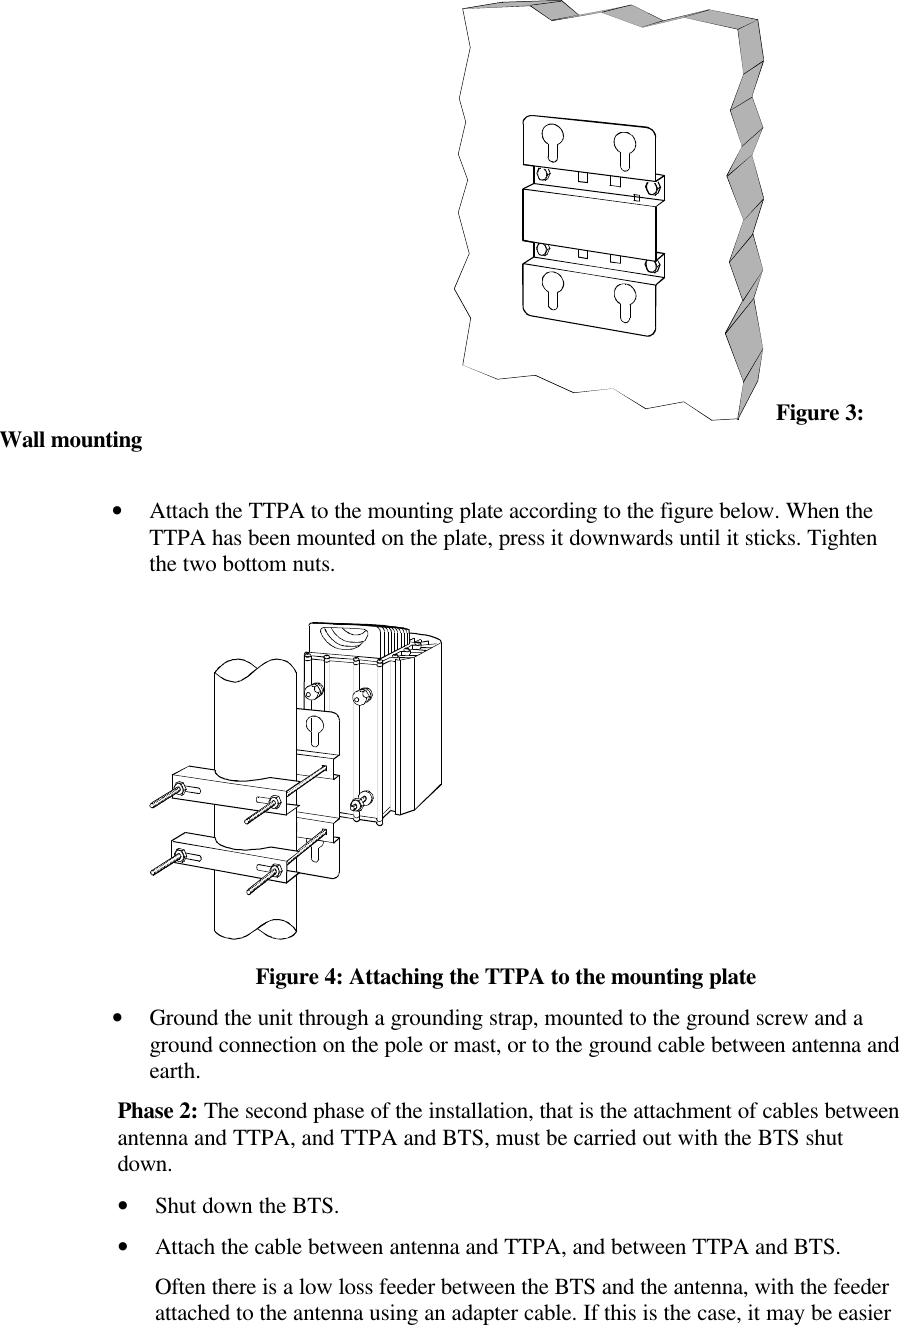   Figure 3: Wall mounting•Attach the TTPA to the mounting plate according to the figure below. When the TTPA has been mounted on the plate, press it downwards until it sticks. Tighten the two bottom nuts.Figure 4: Attaching the TTPA to the mounting plate•Ground the unit through a grounding strap, mounted to the ground screw and a ground connection on the pole or mast, or to the ground cable between antenna and earth.Phase 2: The second phase of the installation, that is the attachment of cables between antenna and TTPA, and TTPA and BTS, must be carried out with the BTS shut down. •Shut down the BTS.•Attach the cable between antenna and TTPA, and between TTPA and BTS.Often there is a low loss feeder between the BTS and the antenna, with the feeder attached to the antenna using an adapter cable. If this is the case, it may be easier 